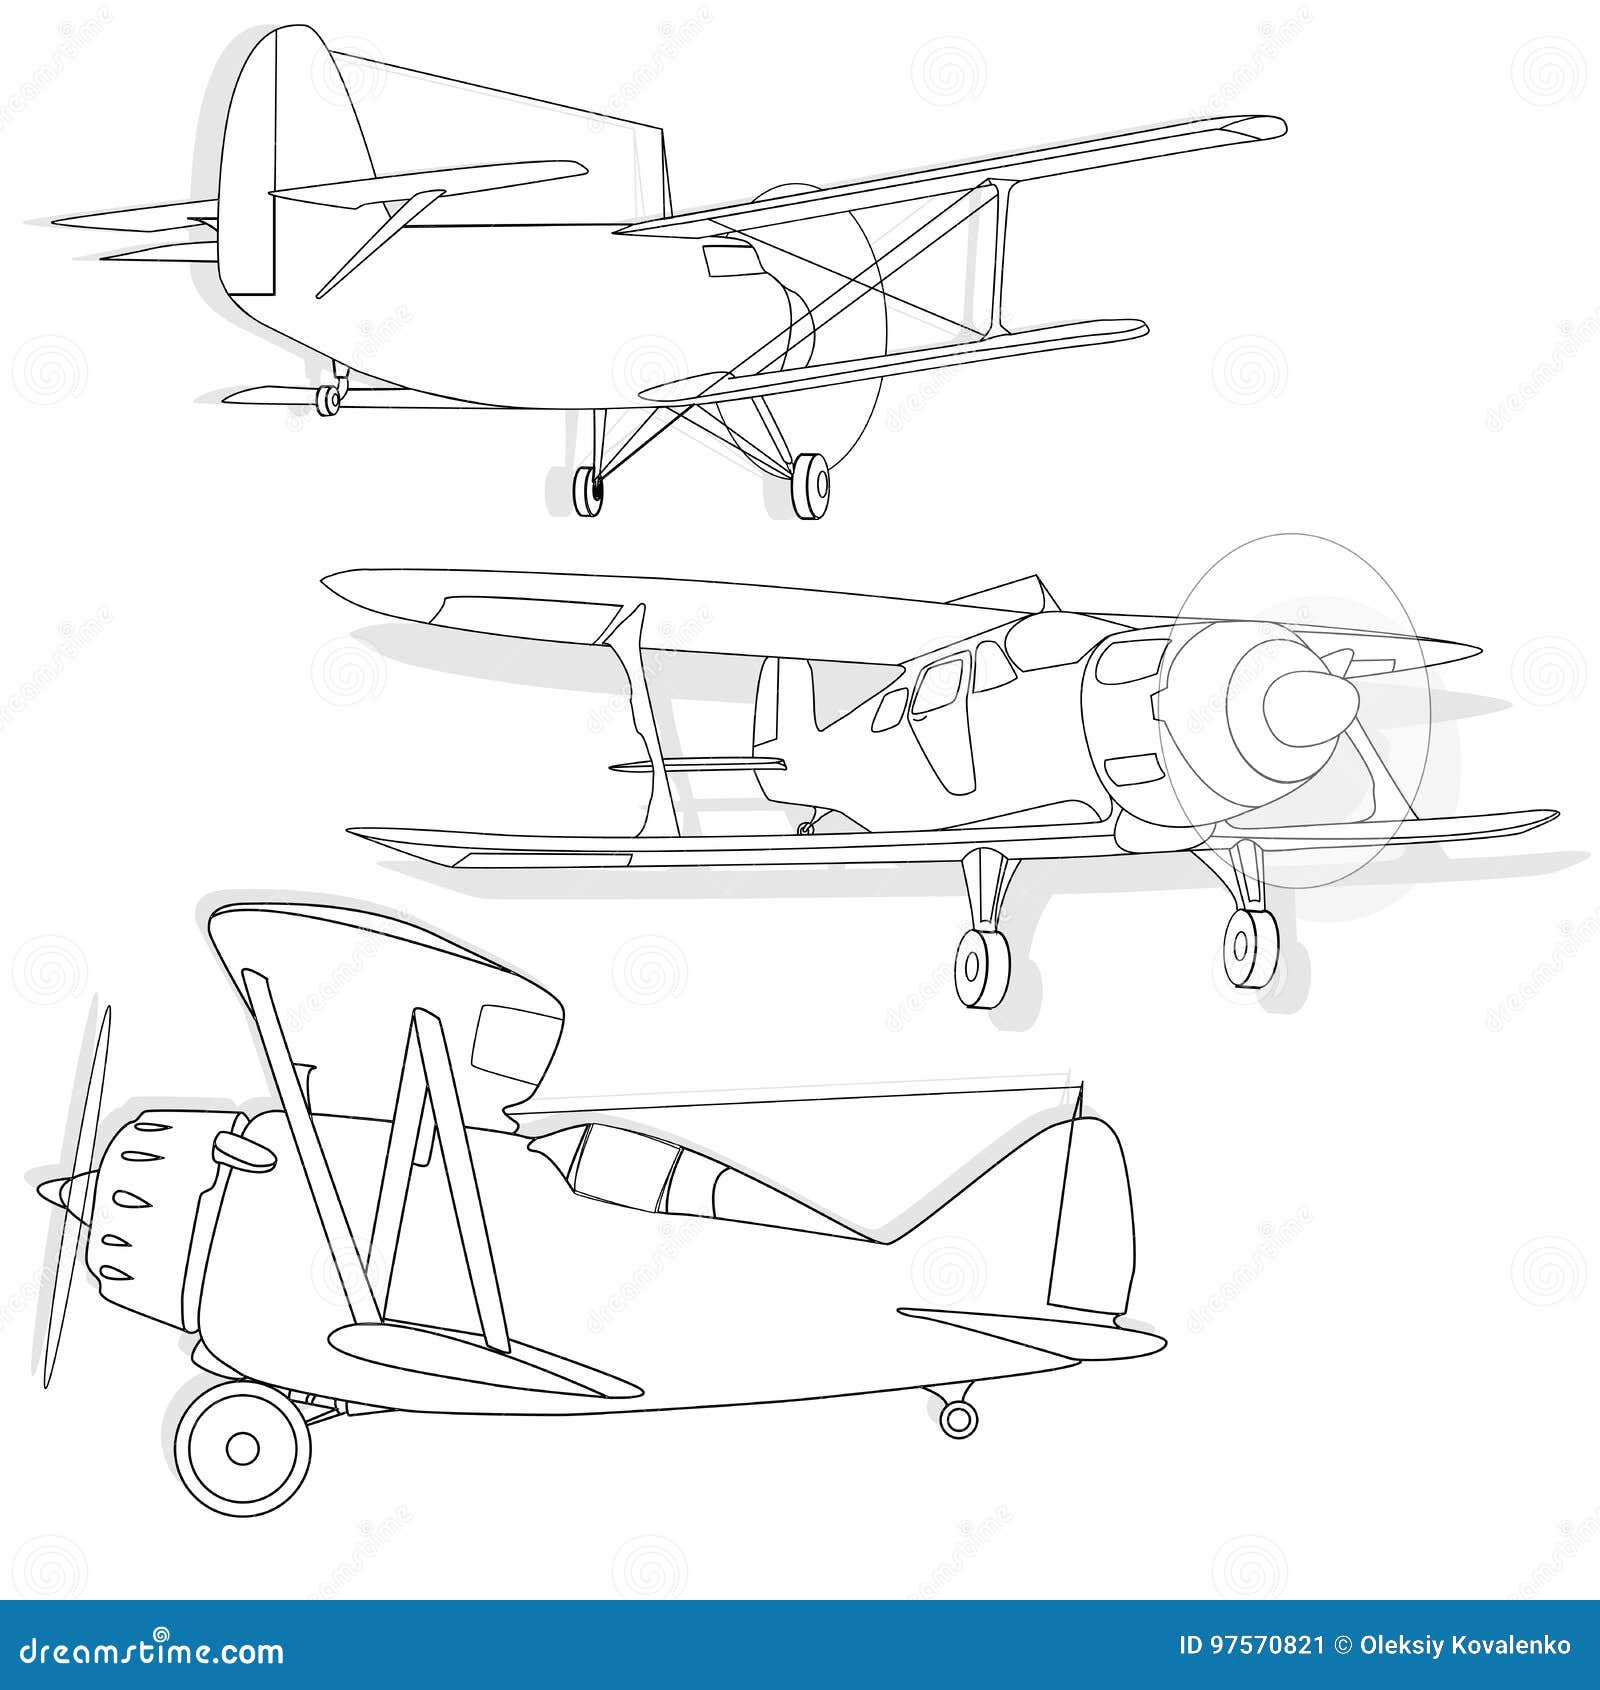 A Bi Plane Isolated on Sky. Stock Vector - Illustration of isolated ...